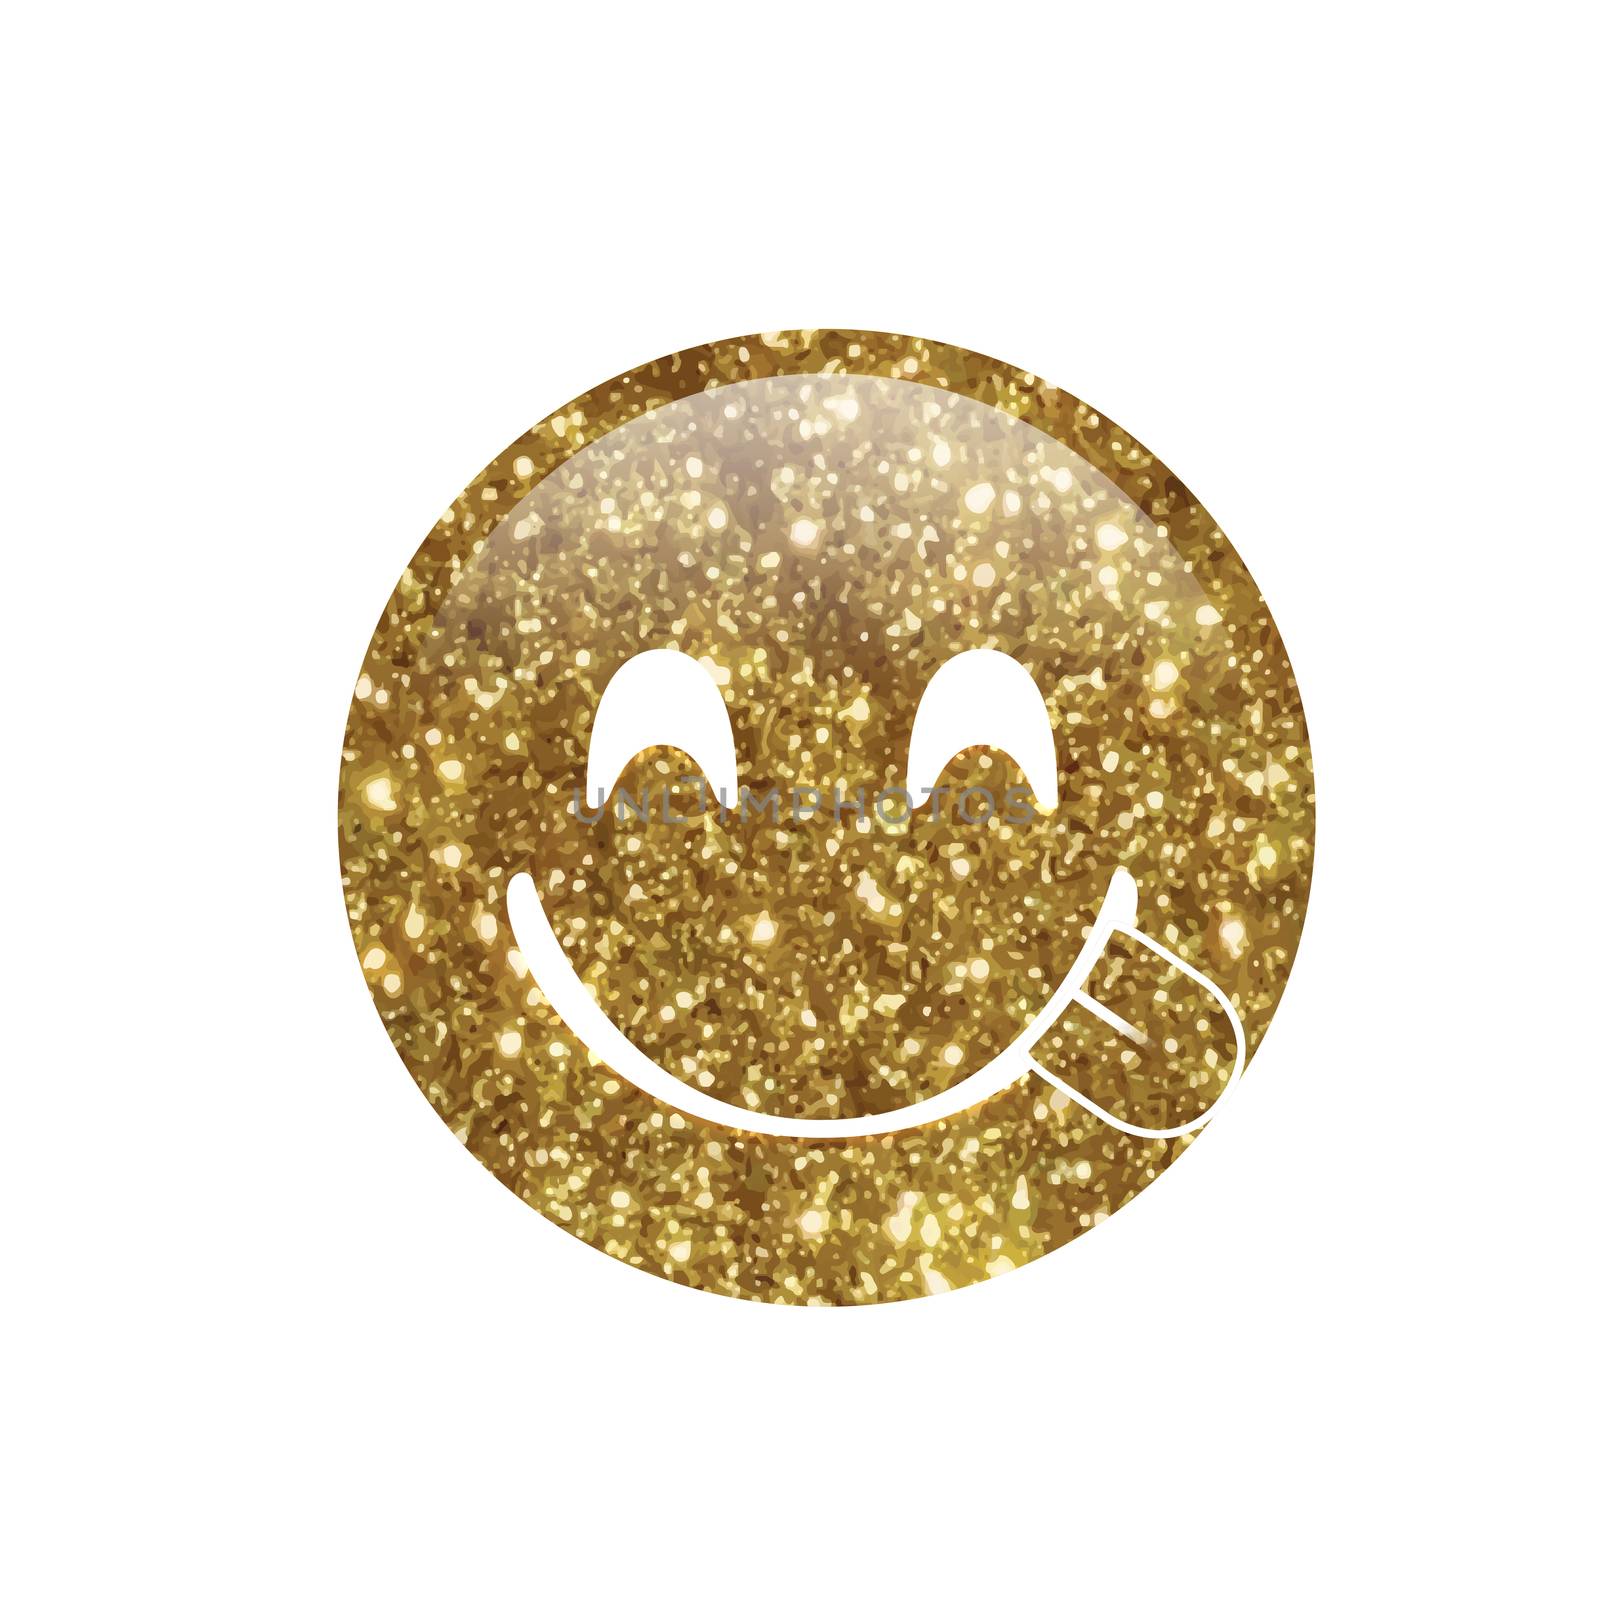 Glitter golden smiley and tasting food face with tongue out icon by cougarsan